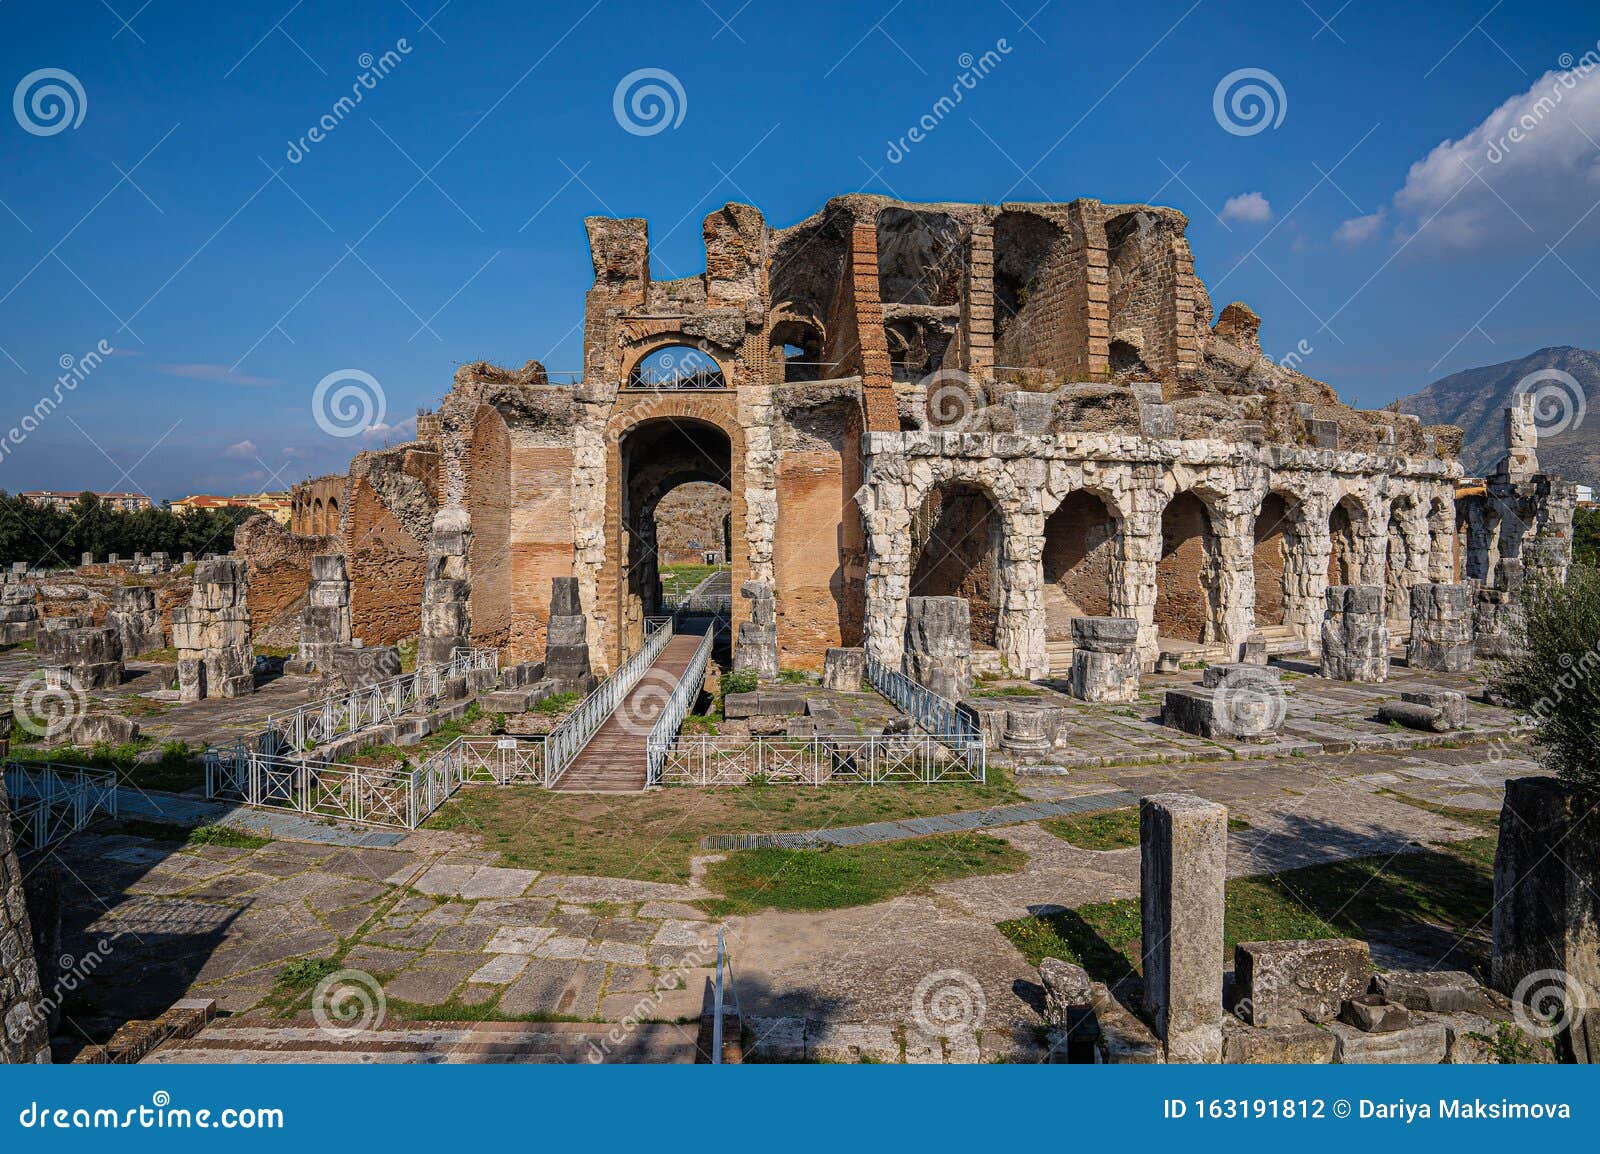 Ruins Of An Ancient Amphitheater In Santa Maria Capua Vetere In Campania In Italy Stock Photo Image Of Southern Ruined 163191812